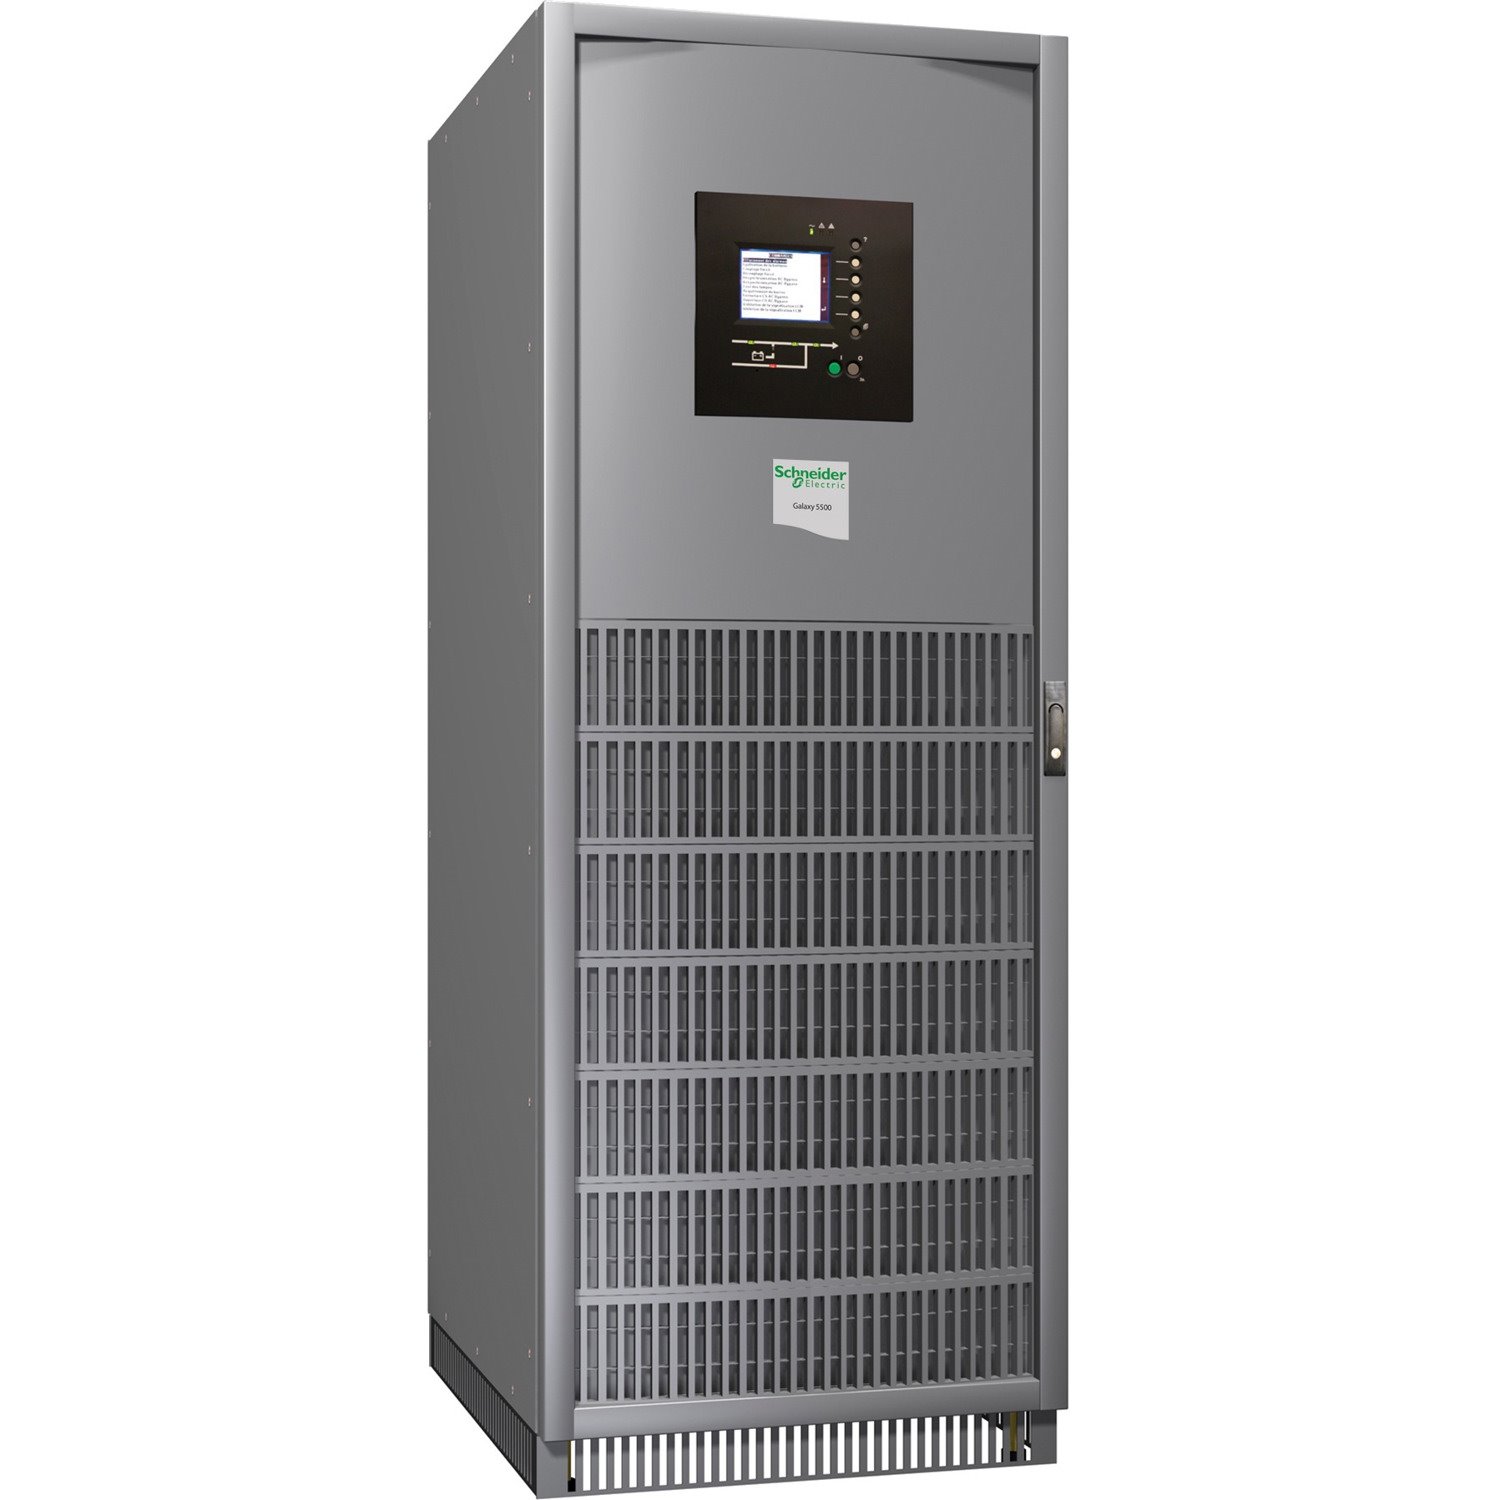 APC by Schneider Electric Galaxy 5500 Double Conversion Online UPS - 100 kVA